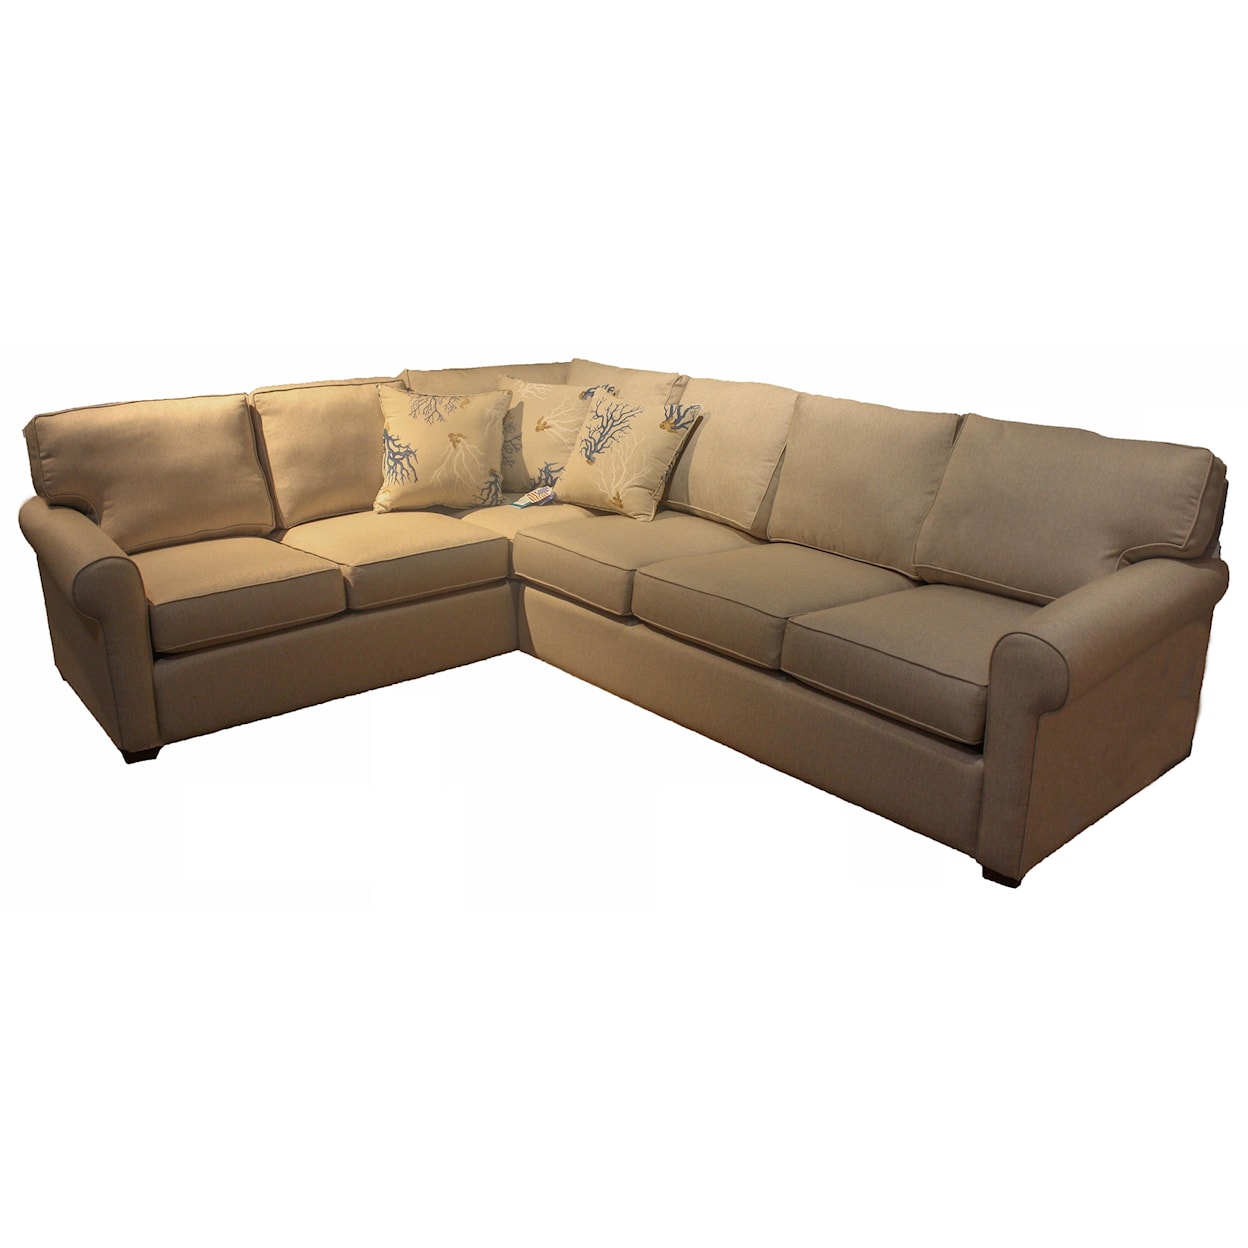 Capris Furniture 402 2 PC Sectional